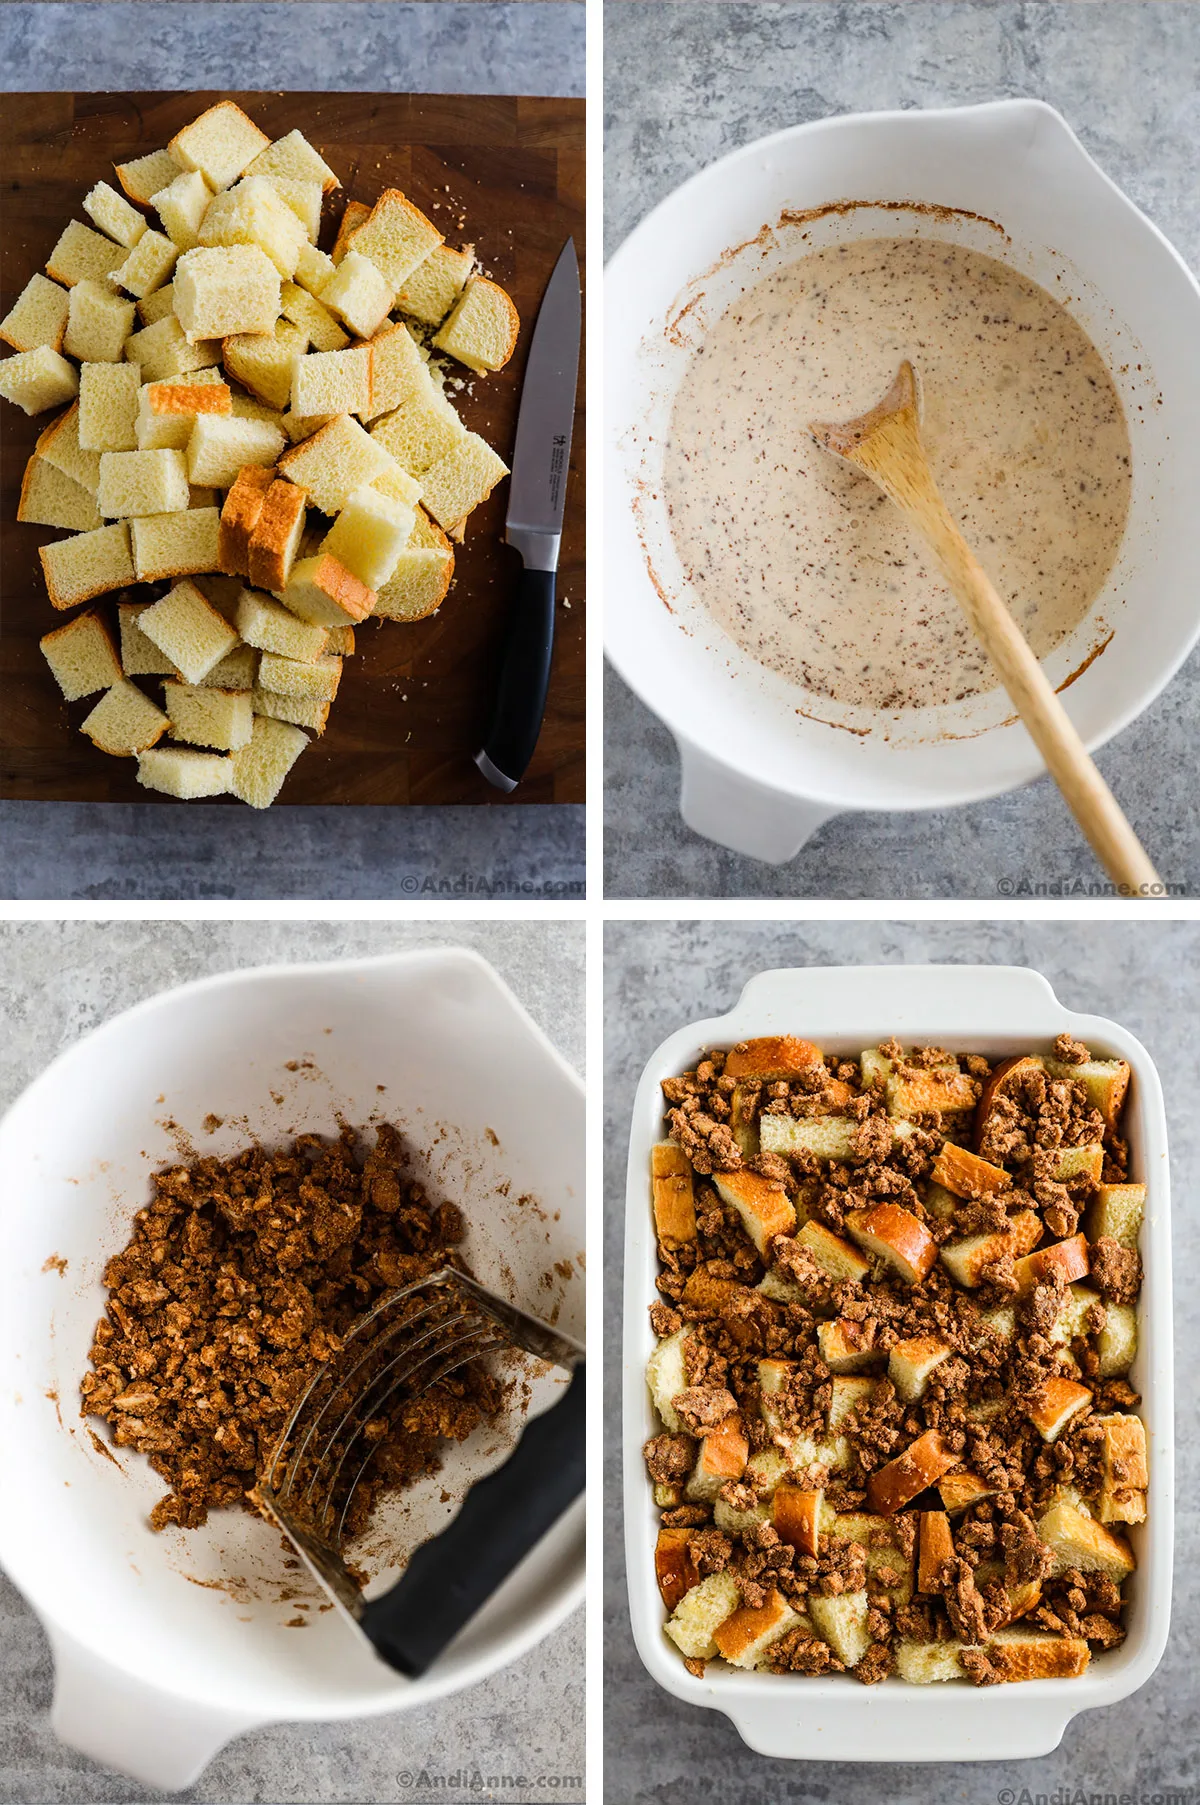 Four images grouped together. First is cubes of bread with a knife on cutting board, second is bowl of cinnamon and milk, third is crumbled butter mixture in a bowl, fourth is casserole dish with unbaked french toast recipe inside.